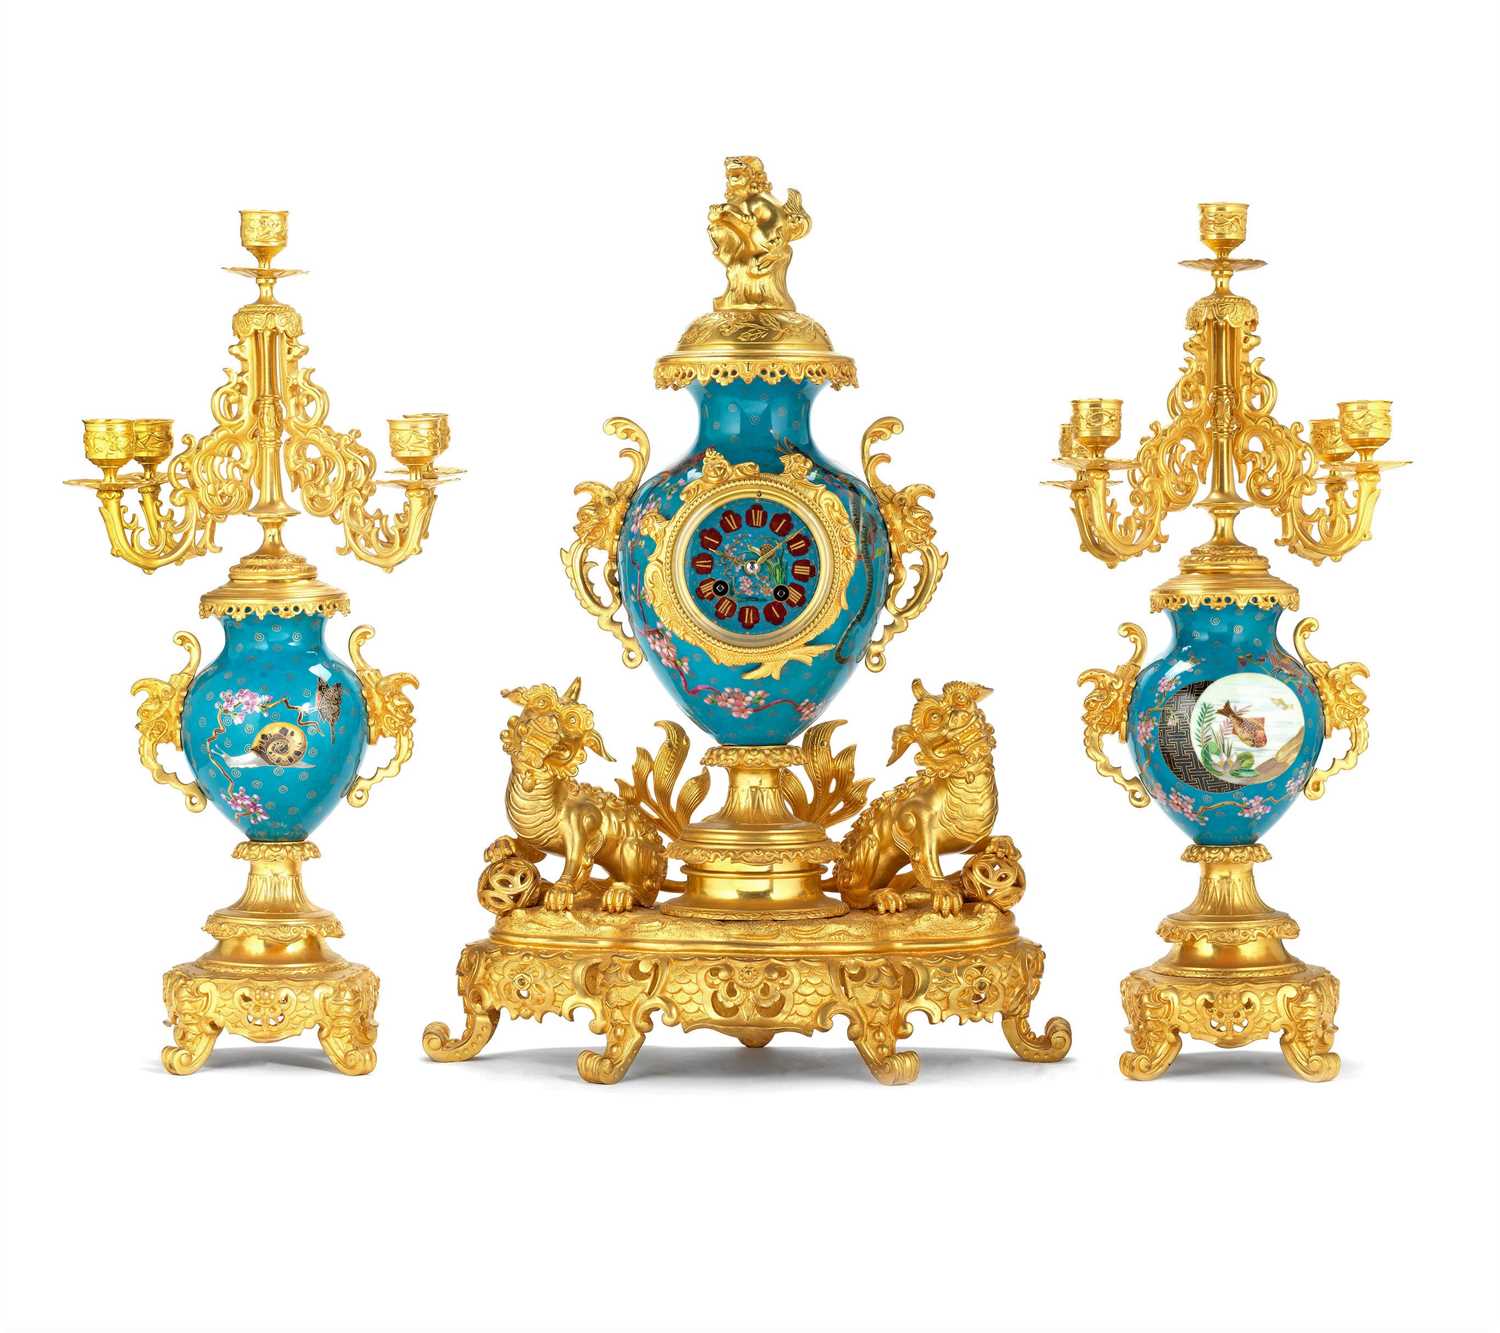 A 19TH CENTURY JAPONISME STYLE GILT BRONZE AND PORCELAIN MOUNTED CLOCK GARNITURE